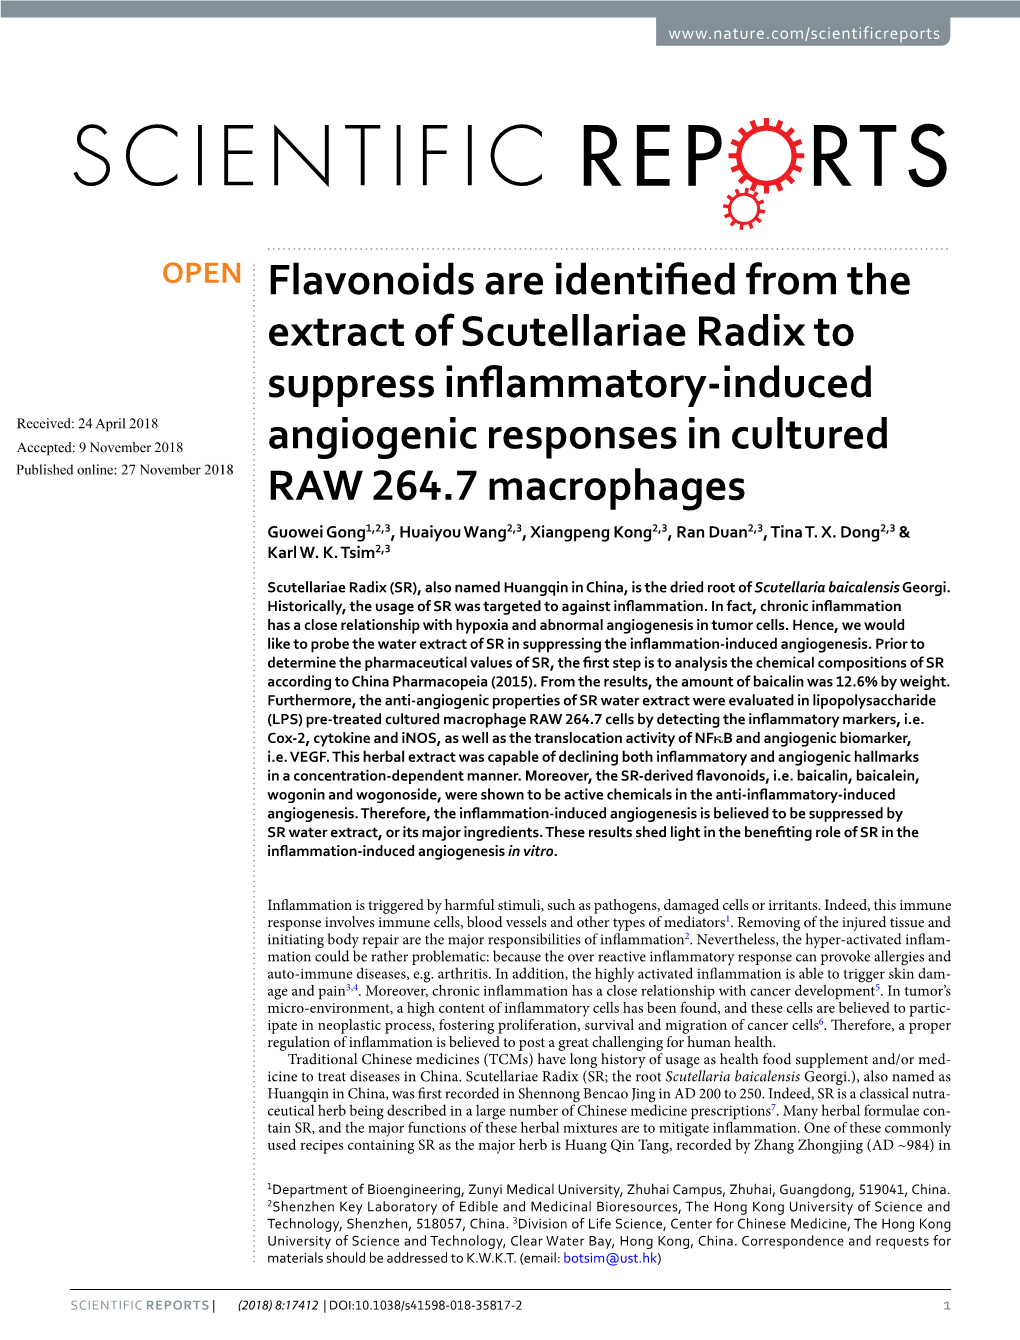 Flavonoids Are Identified from the Extract of Scutellariae Radix To